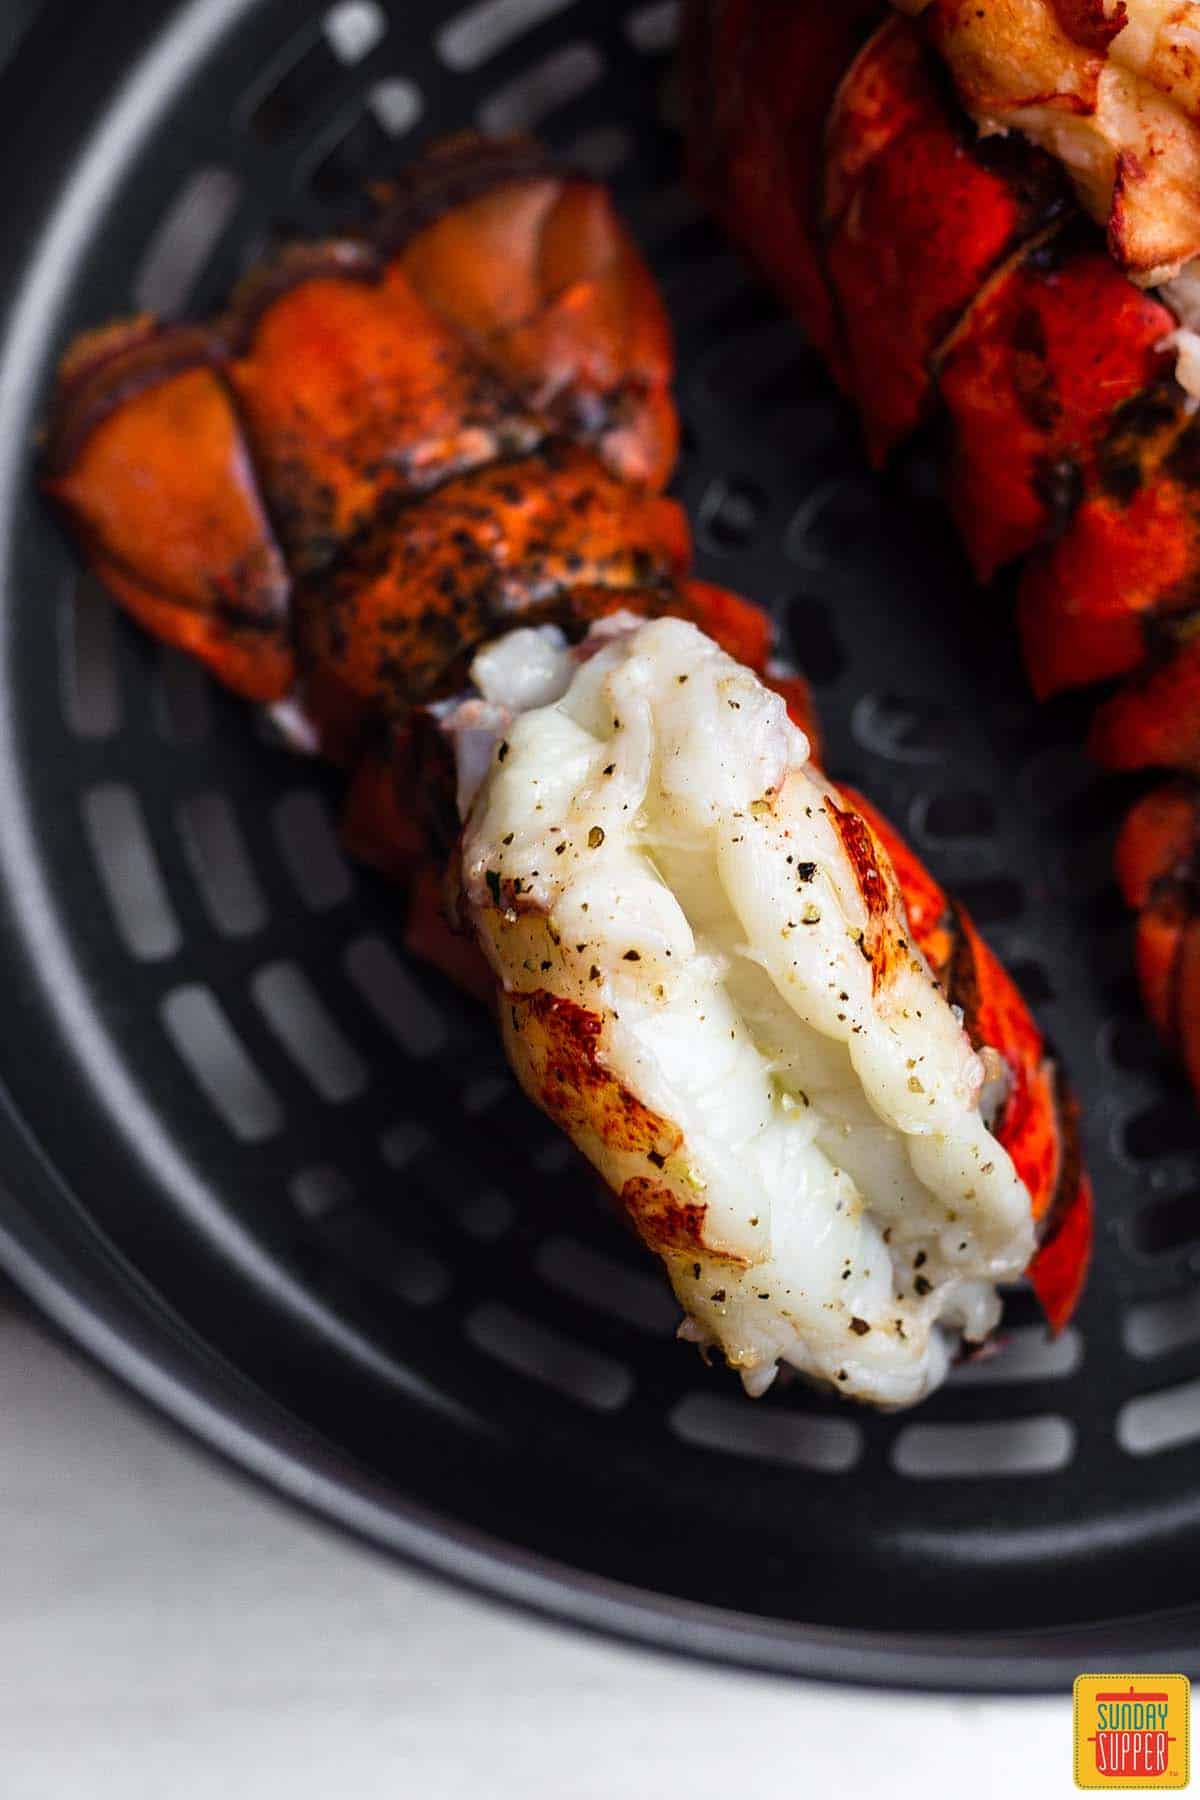 Lobster tails in the air fryer basket